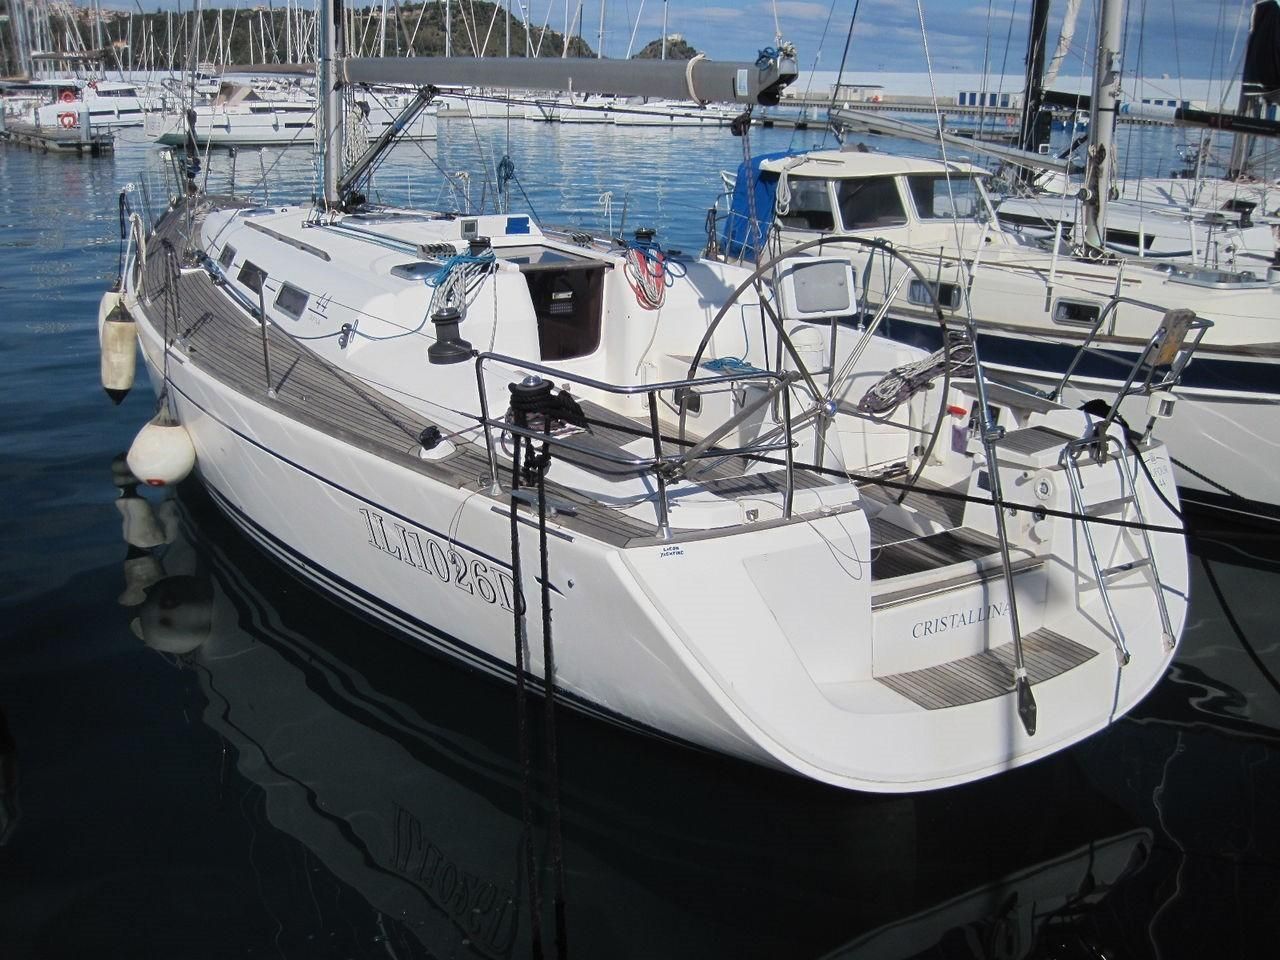 dufour yachts for sale uk